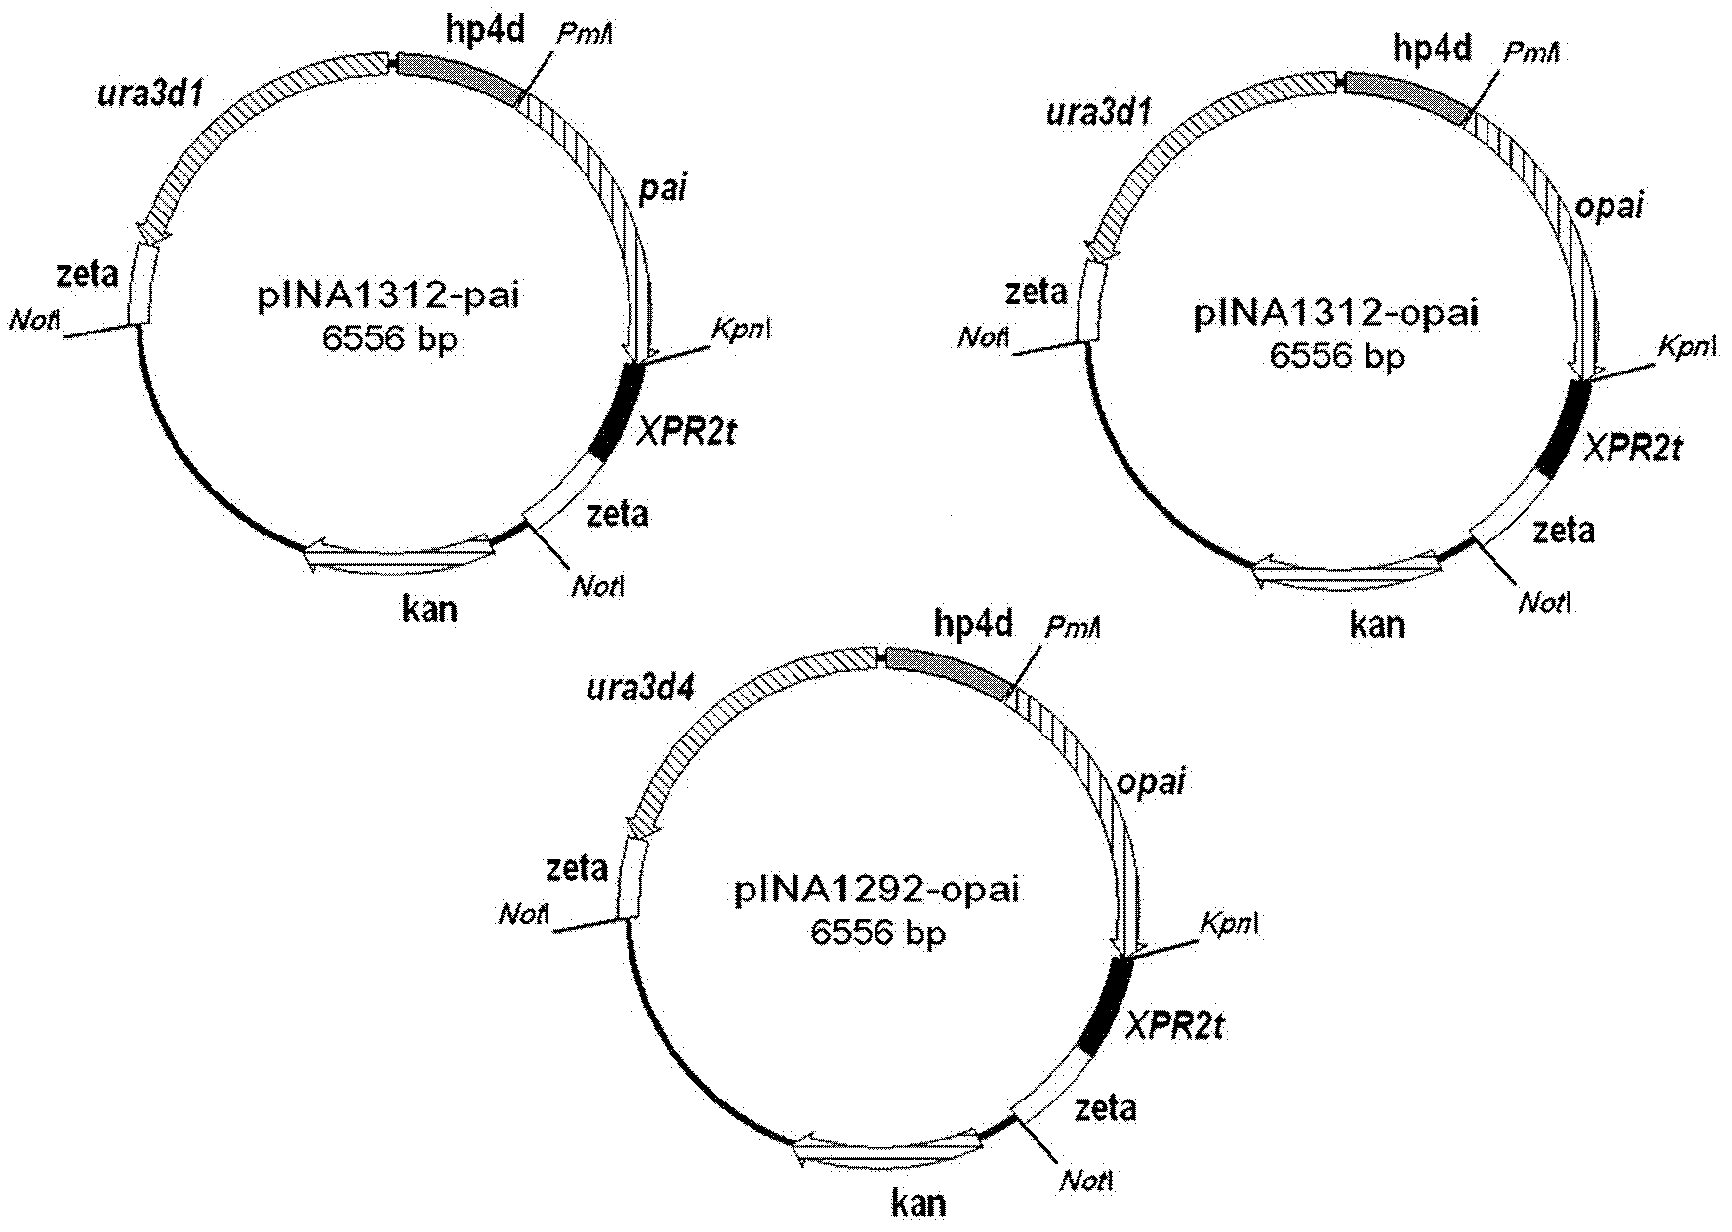 Recombinant yeast strain capable of producing conjugated linoleic acid and application thereof